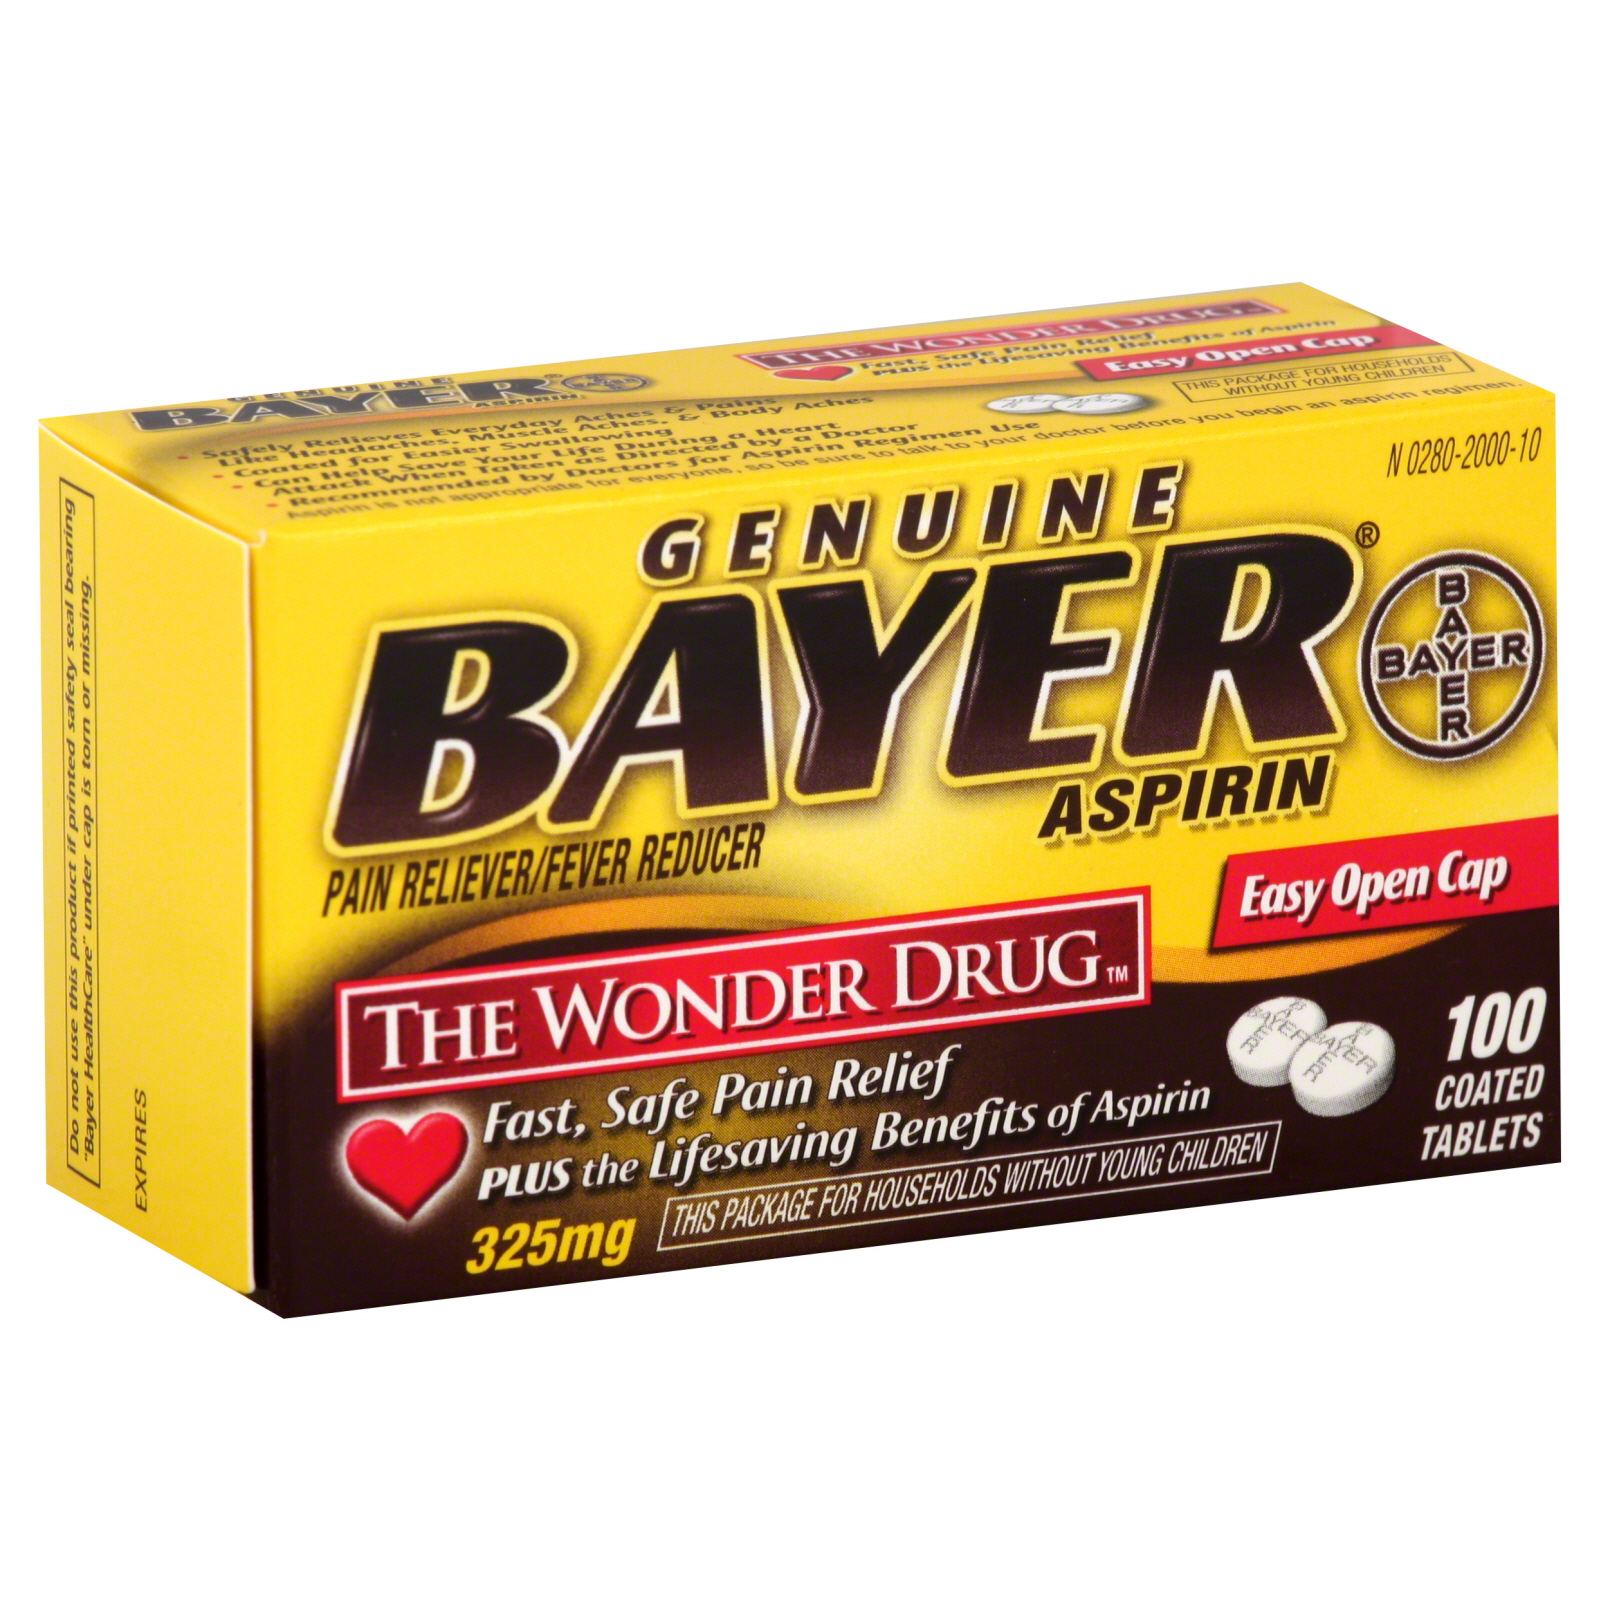 UPC 312843101128 product image for Bayer Pain Reliever/Fever Reducer, 325 mg, Coated Tablets, 100 tablets - BAYER C | upcitemdb.com